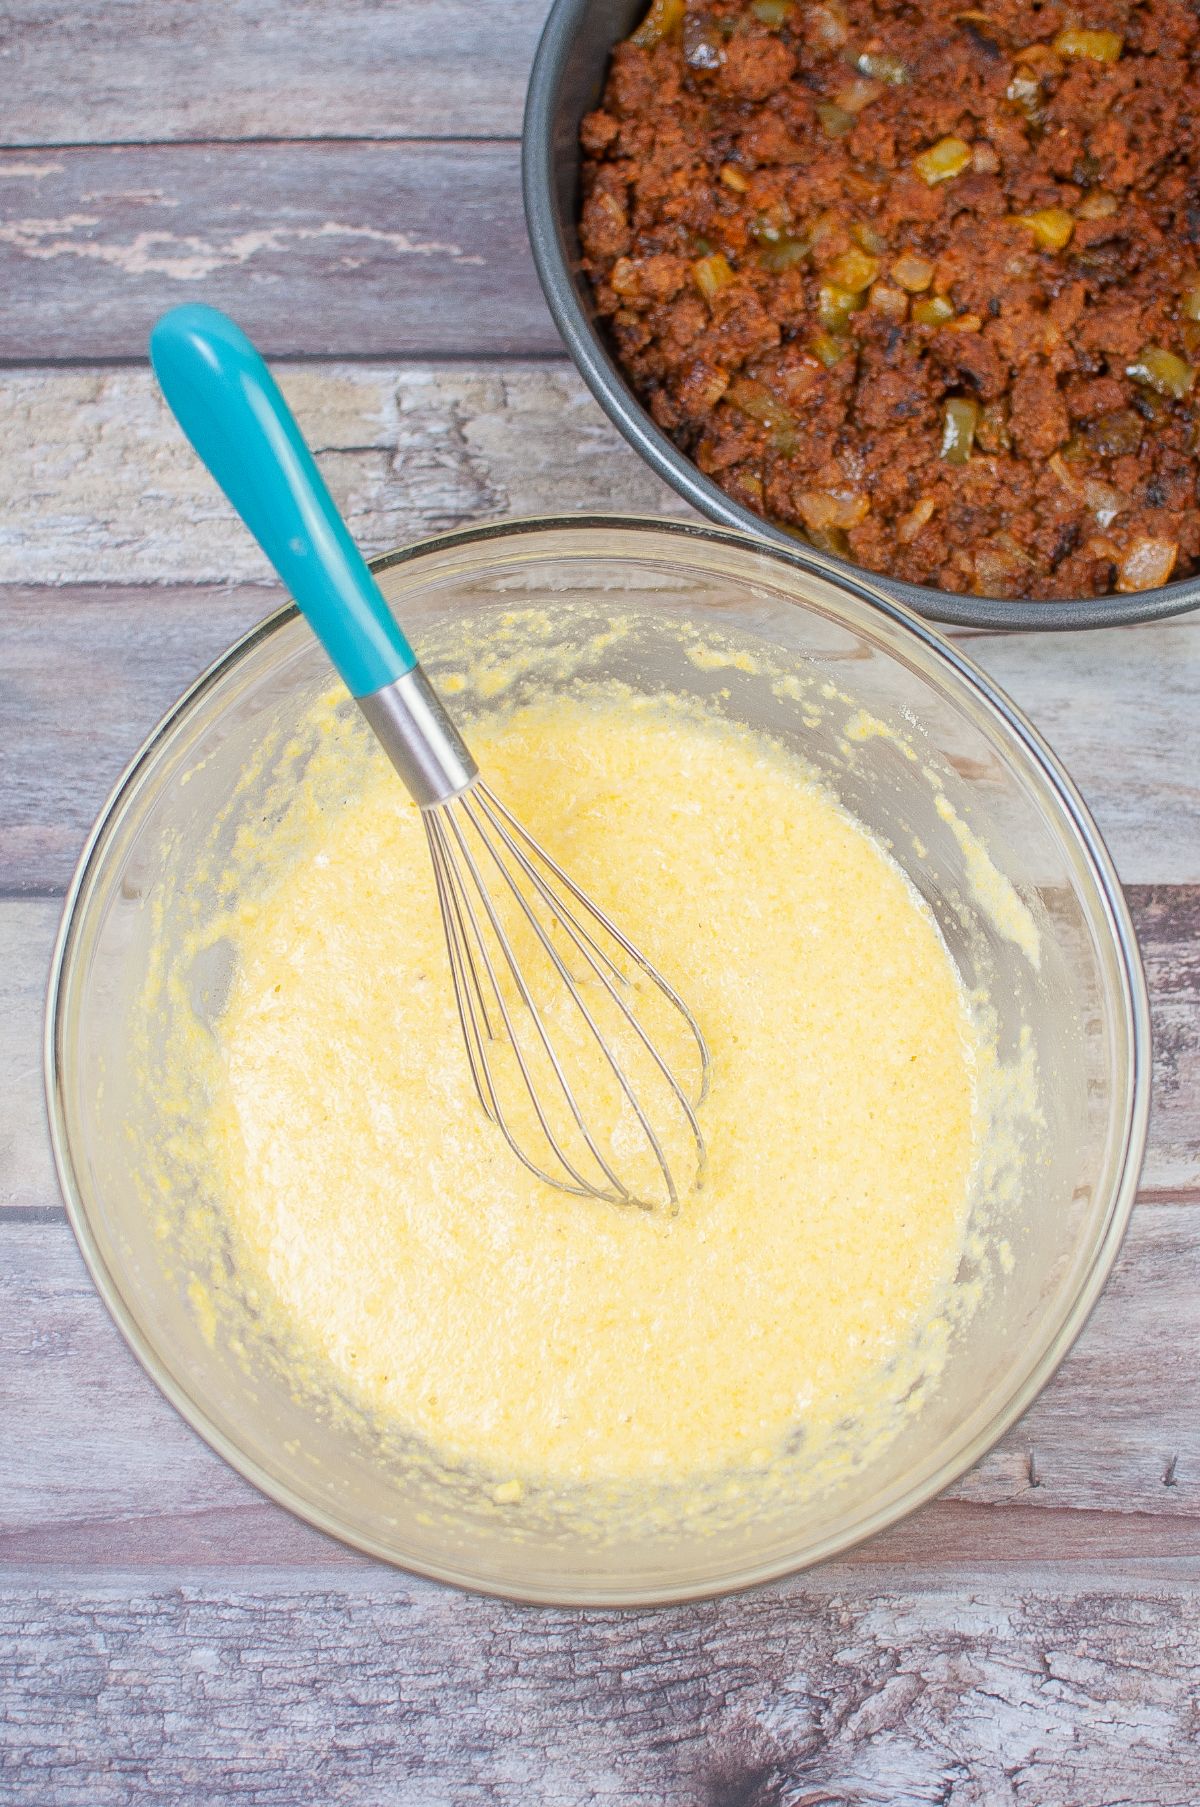 Cornbread batter in a mixing bowl with whisker next to the meat mixture in a pie pan.